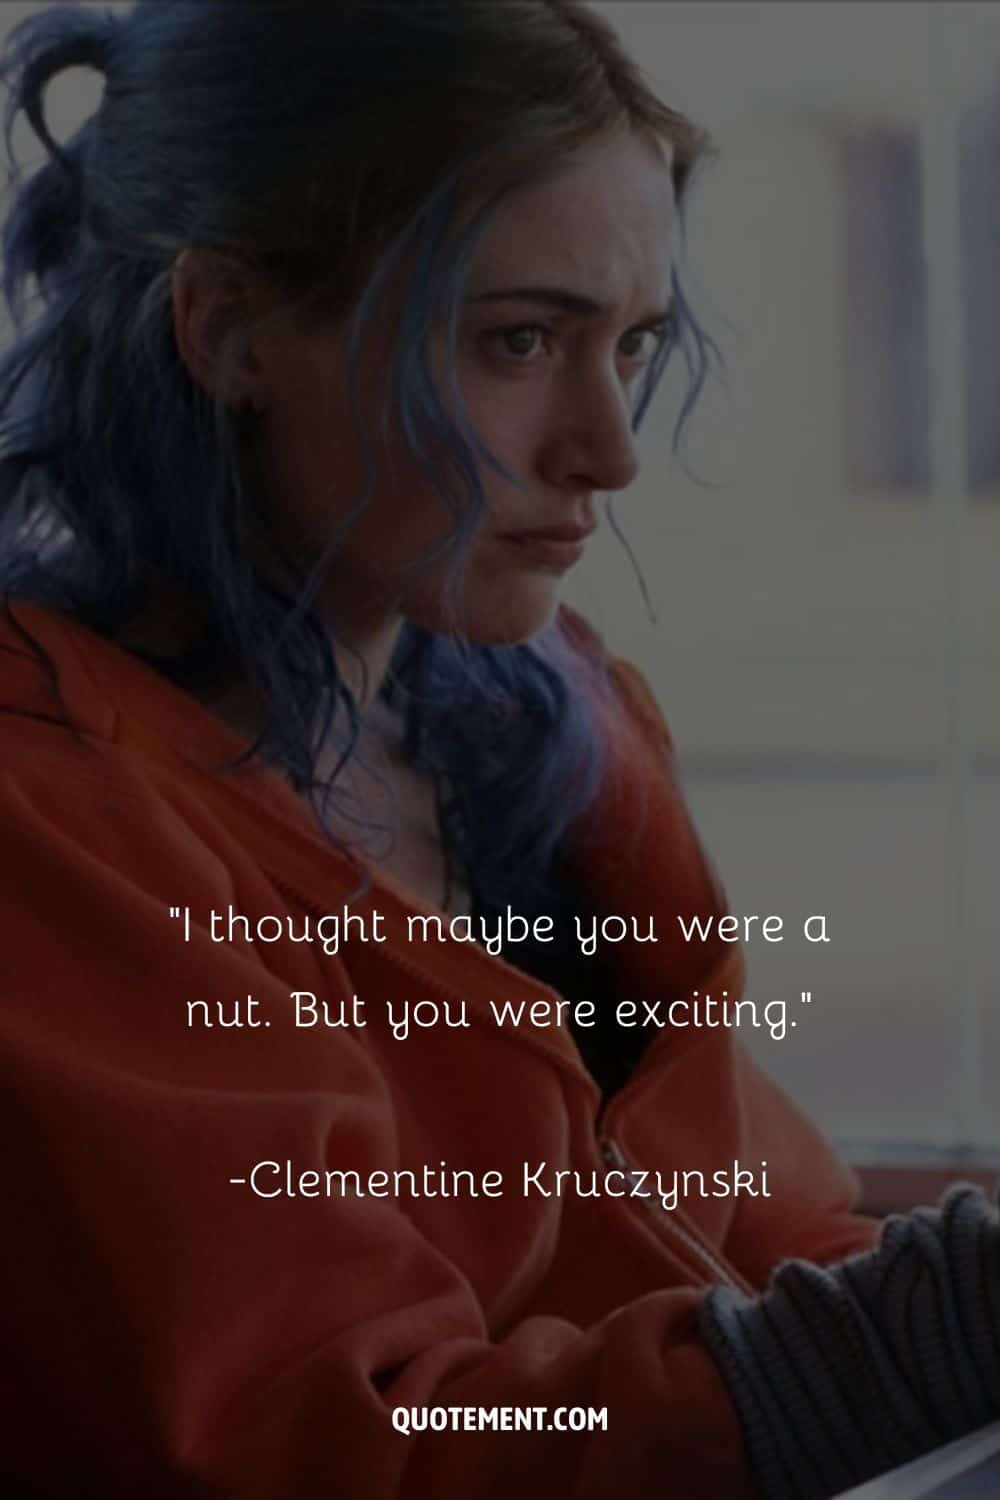 Clementine's striking blue hair and expressive eyes.